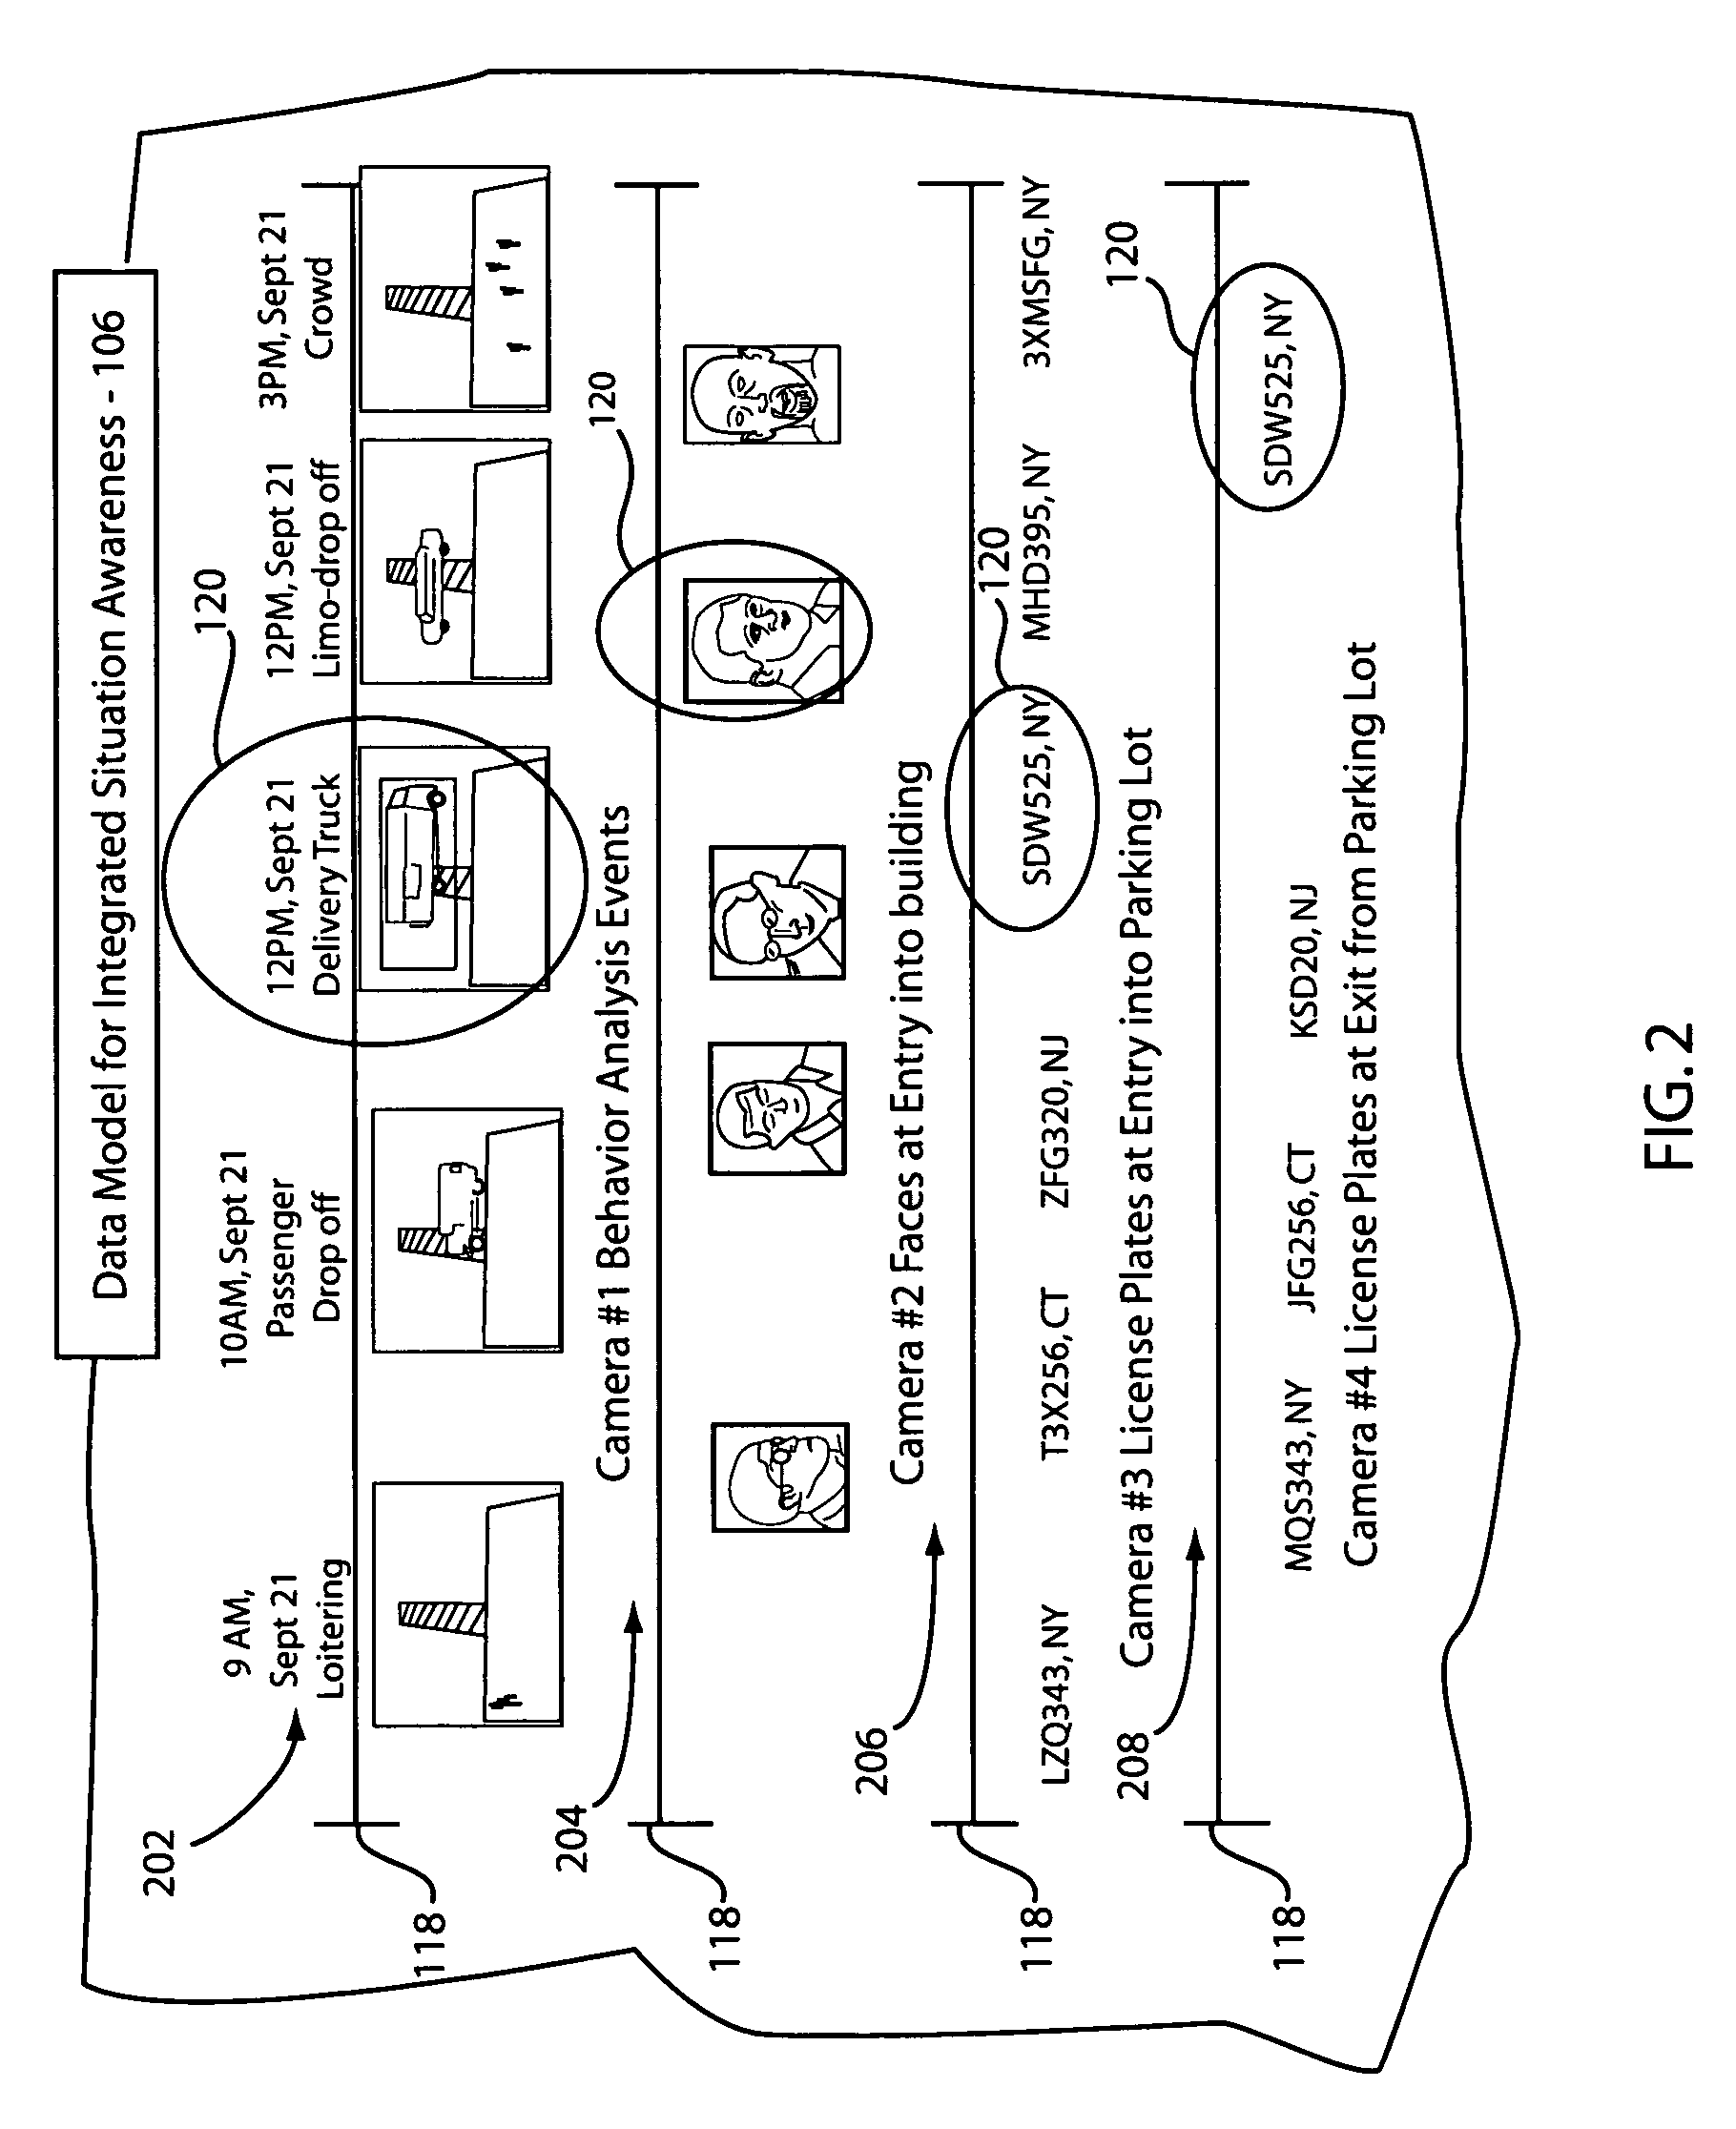 Intelligent surveillance system and method for integrated event based surveillance